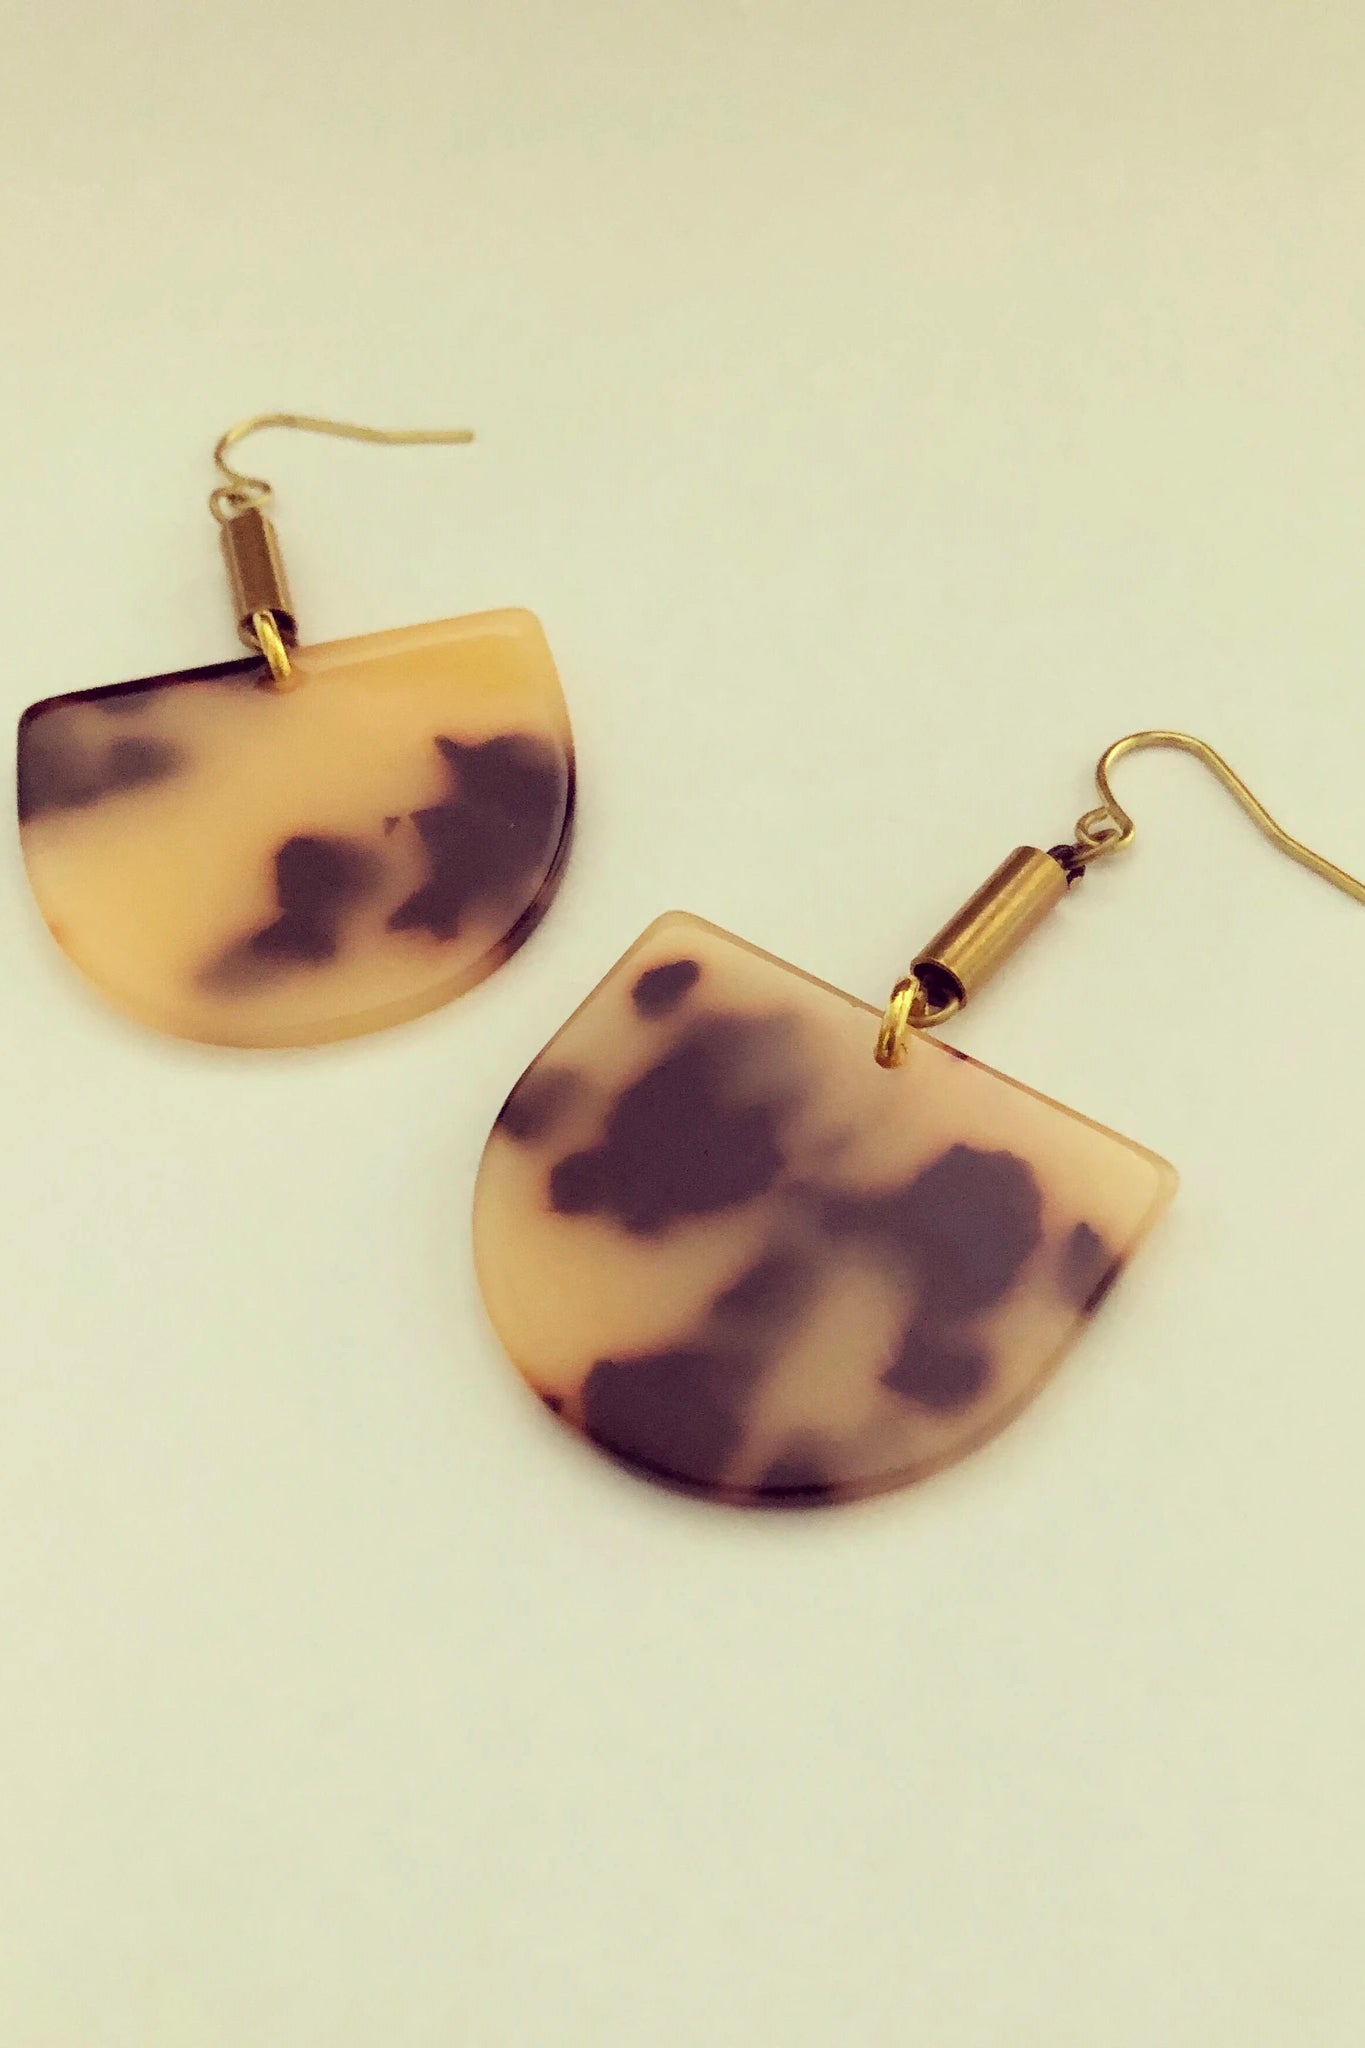 Ruve earrings by Darlings of Denmark; Acrylic, tortoise shell, semi-circle dangle earrings with short brass tube; raw brass and acrylic; flat lay